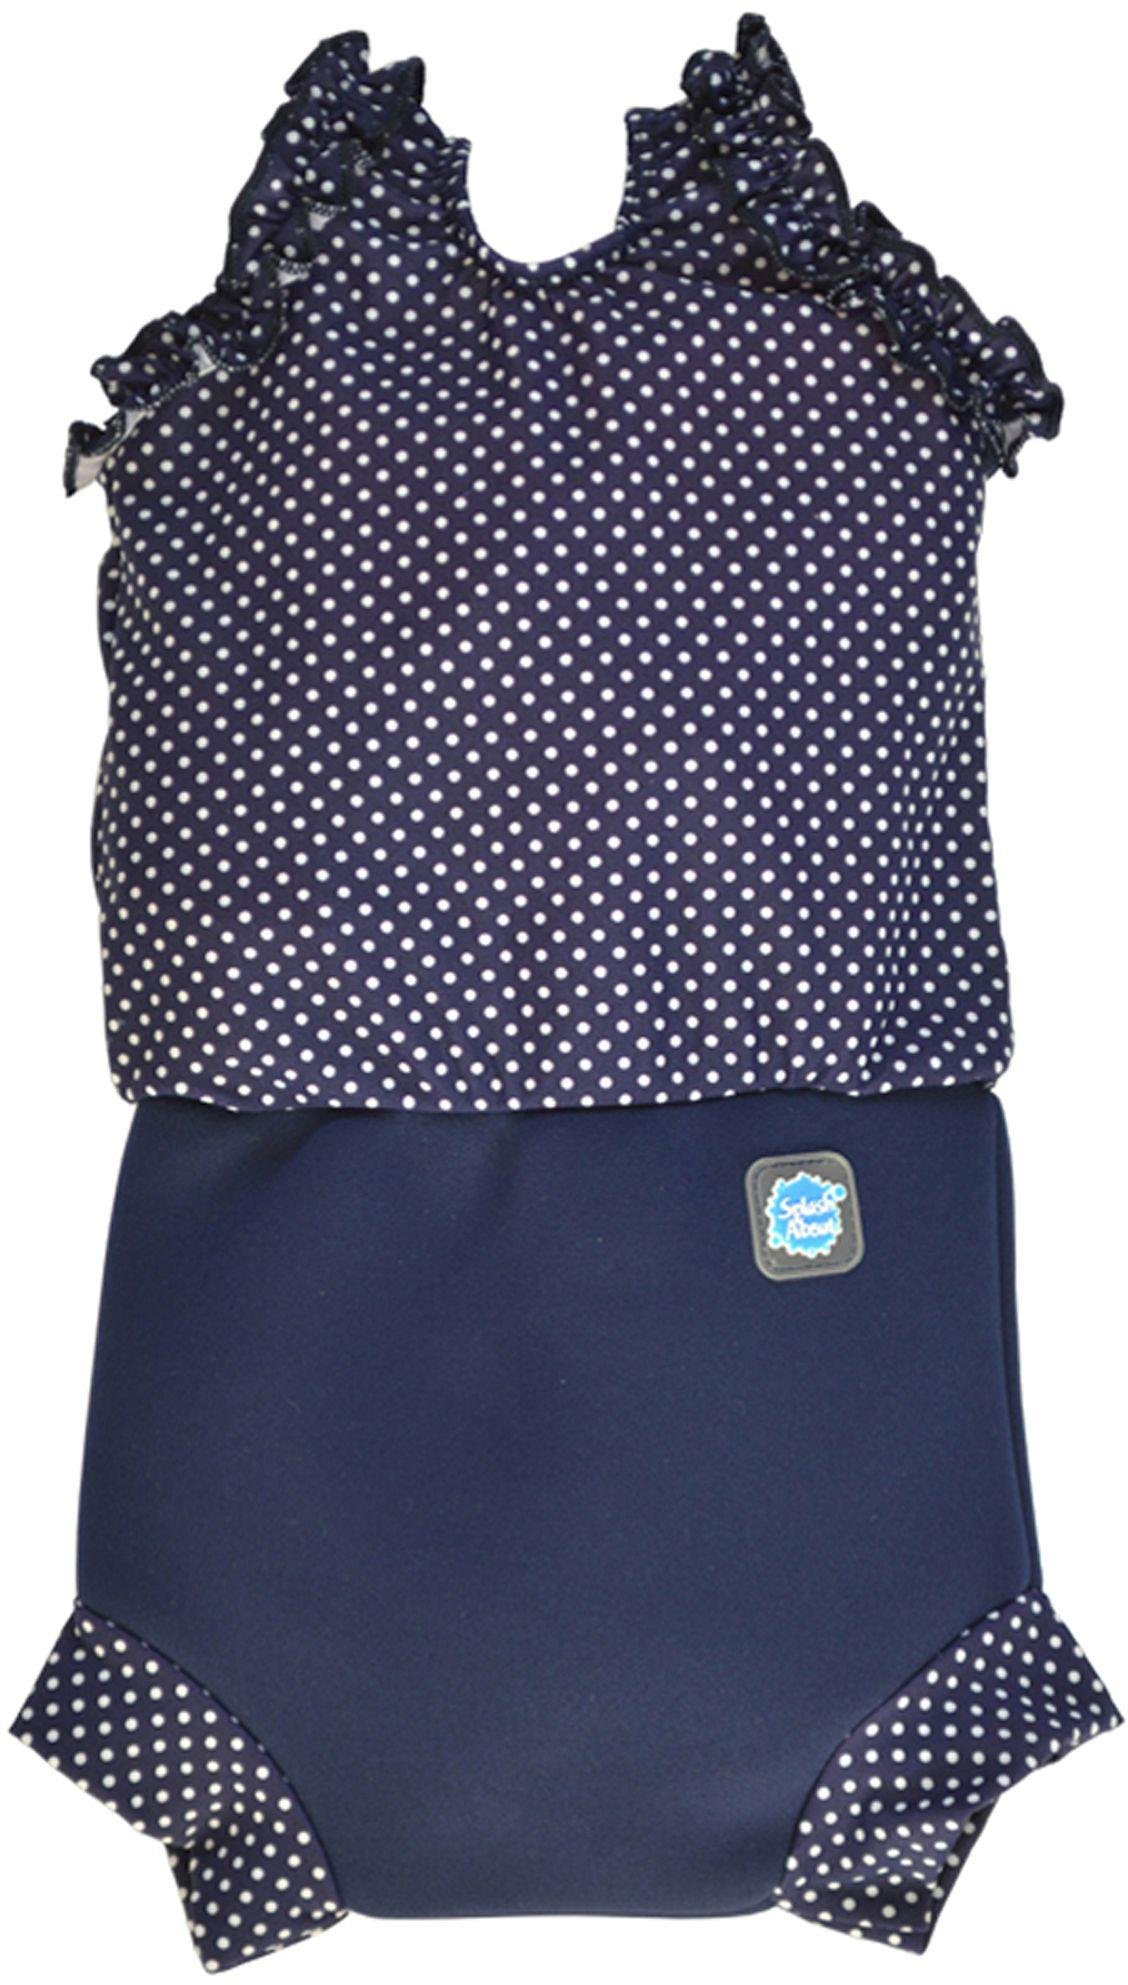 Splash About Happy Nappy Costume Medium 3-6 months Navy Dot. Review